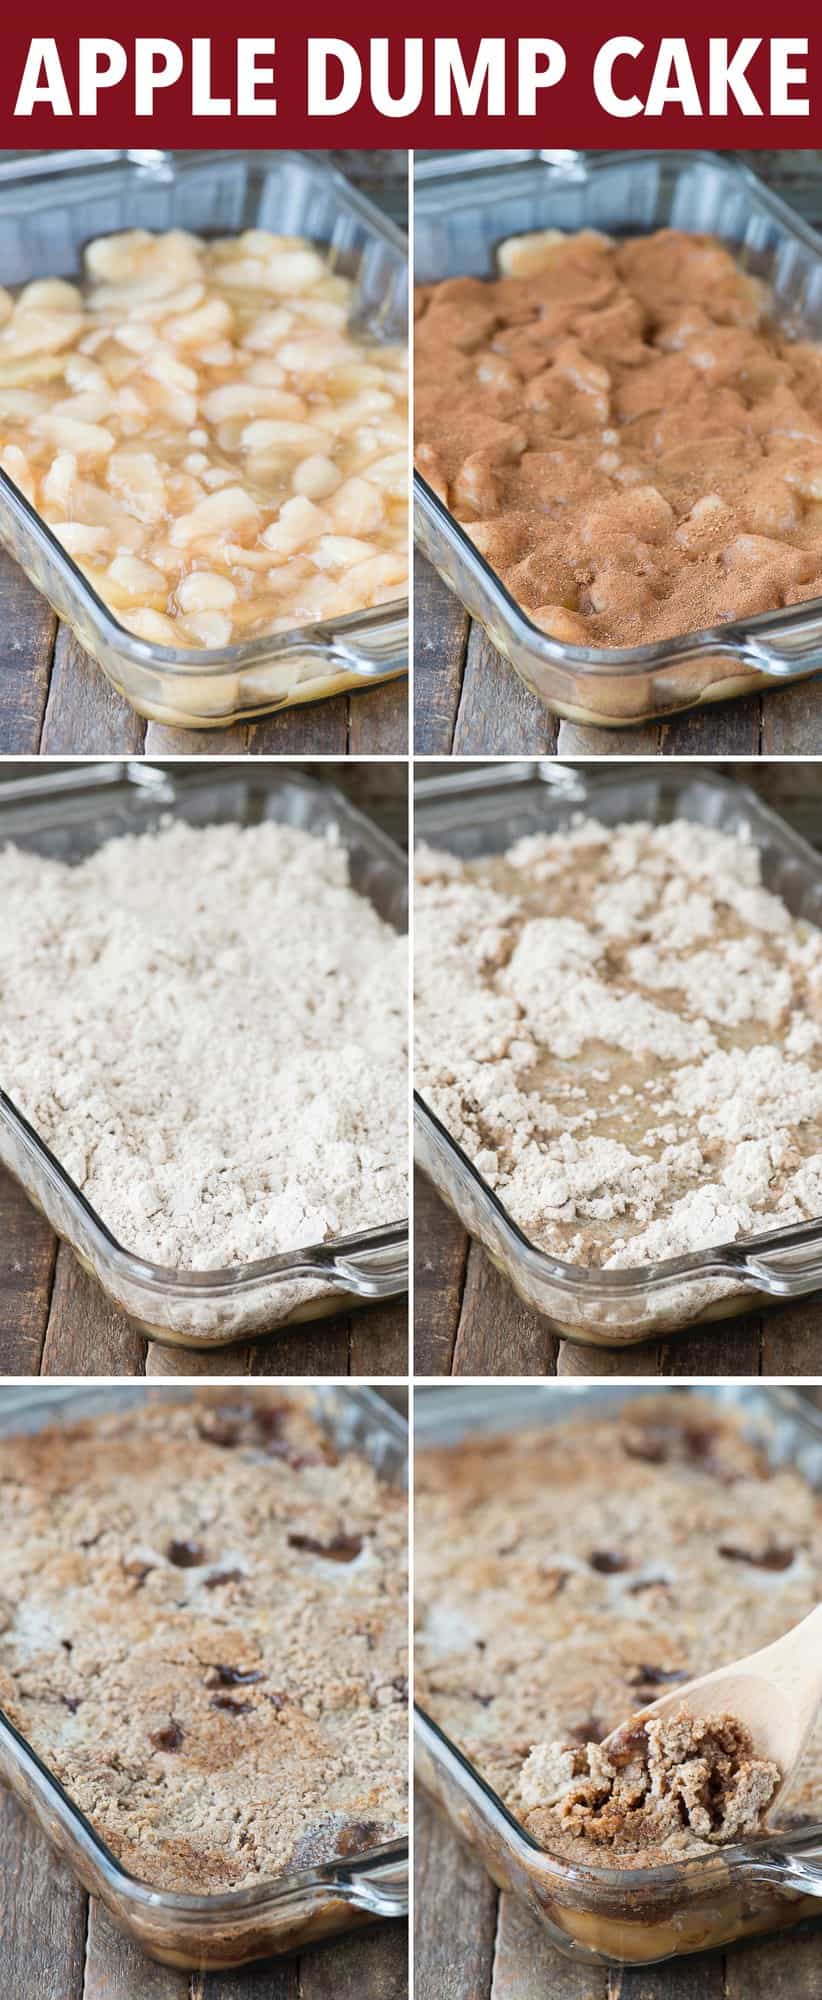 Easy to make 5 ingredient apple dump cake! It’s one of the best fall desserts and turns out to be similar to apple crisp!